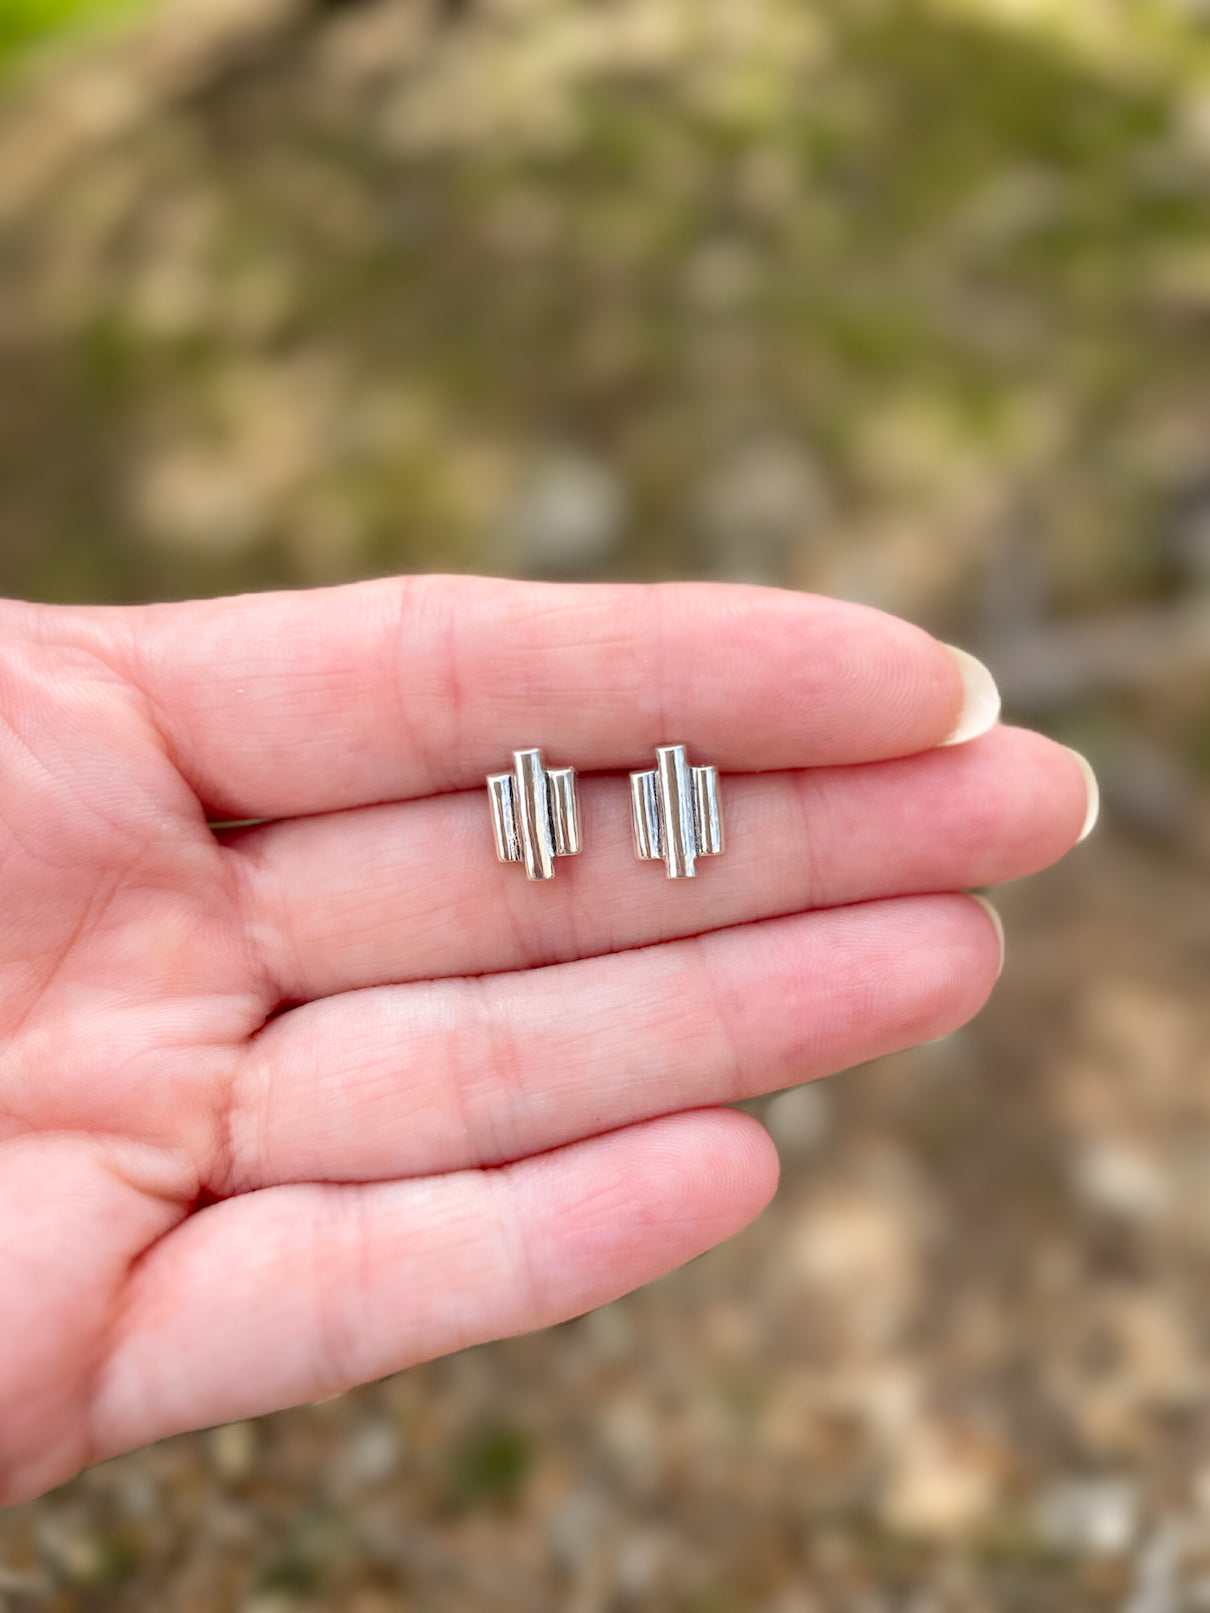 Pair of Art Deco inspired sterling silver 3 bar stud earrings held in hand outdoors in natural light.